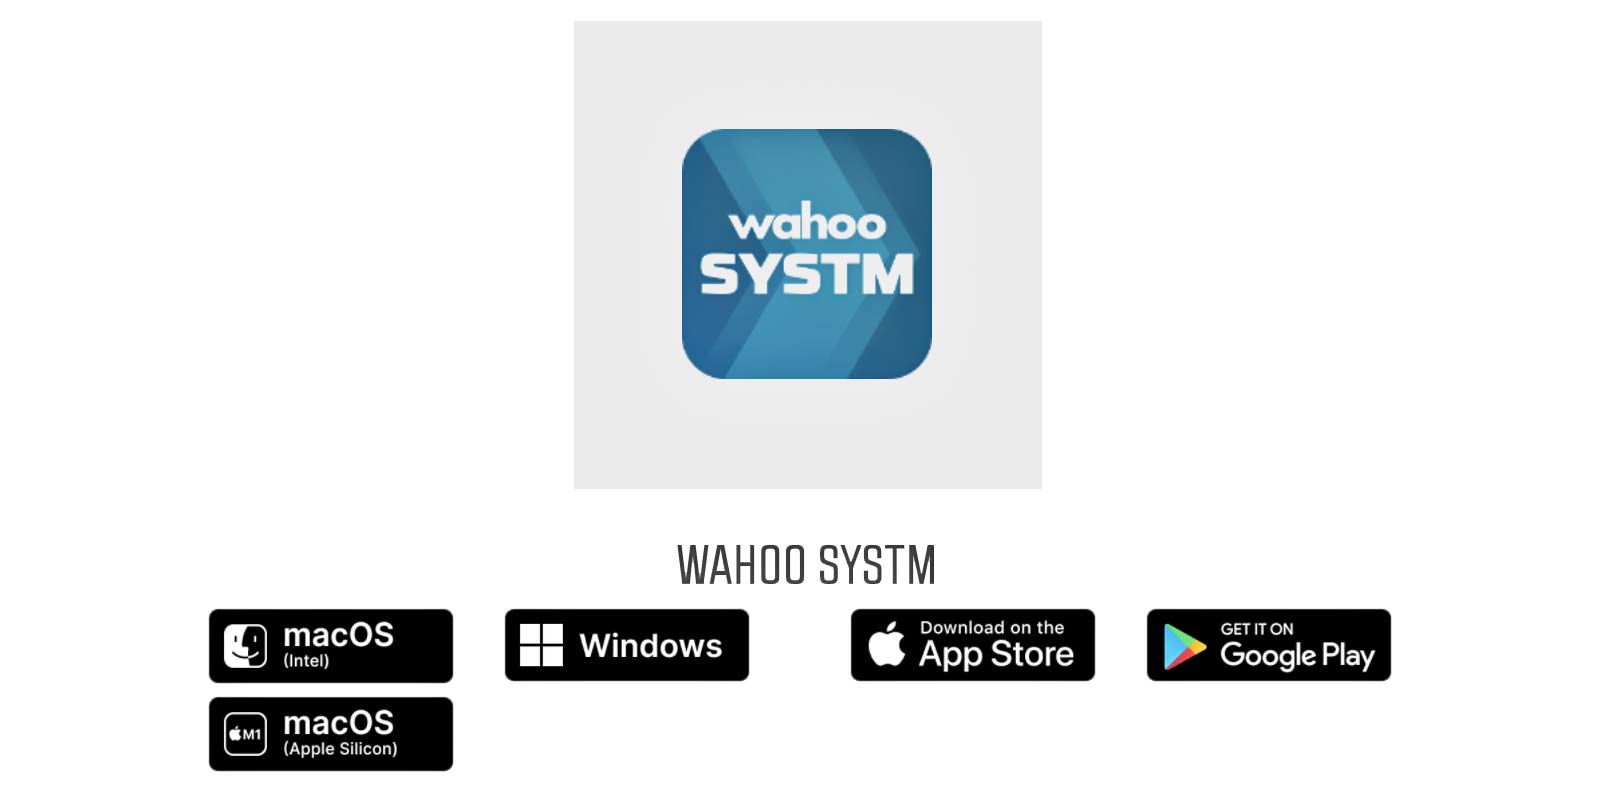 Wahoo Systm cycling structured training app based on The Sufferfest, compatibility